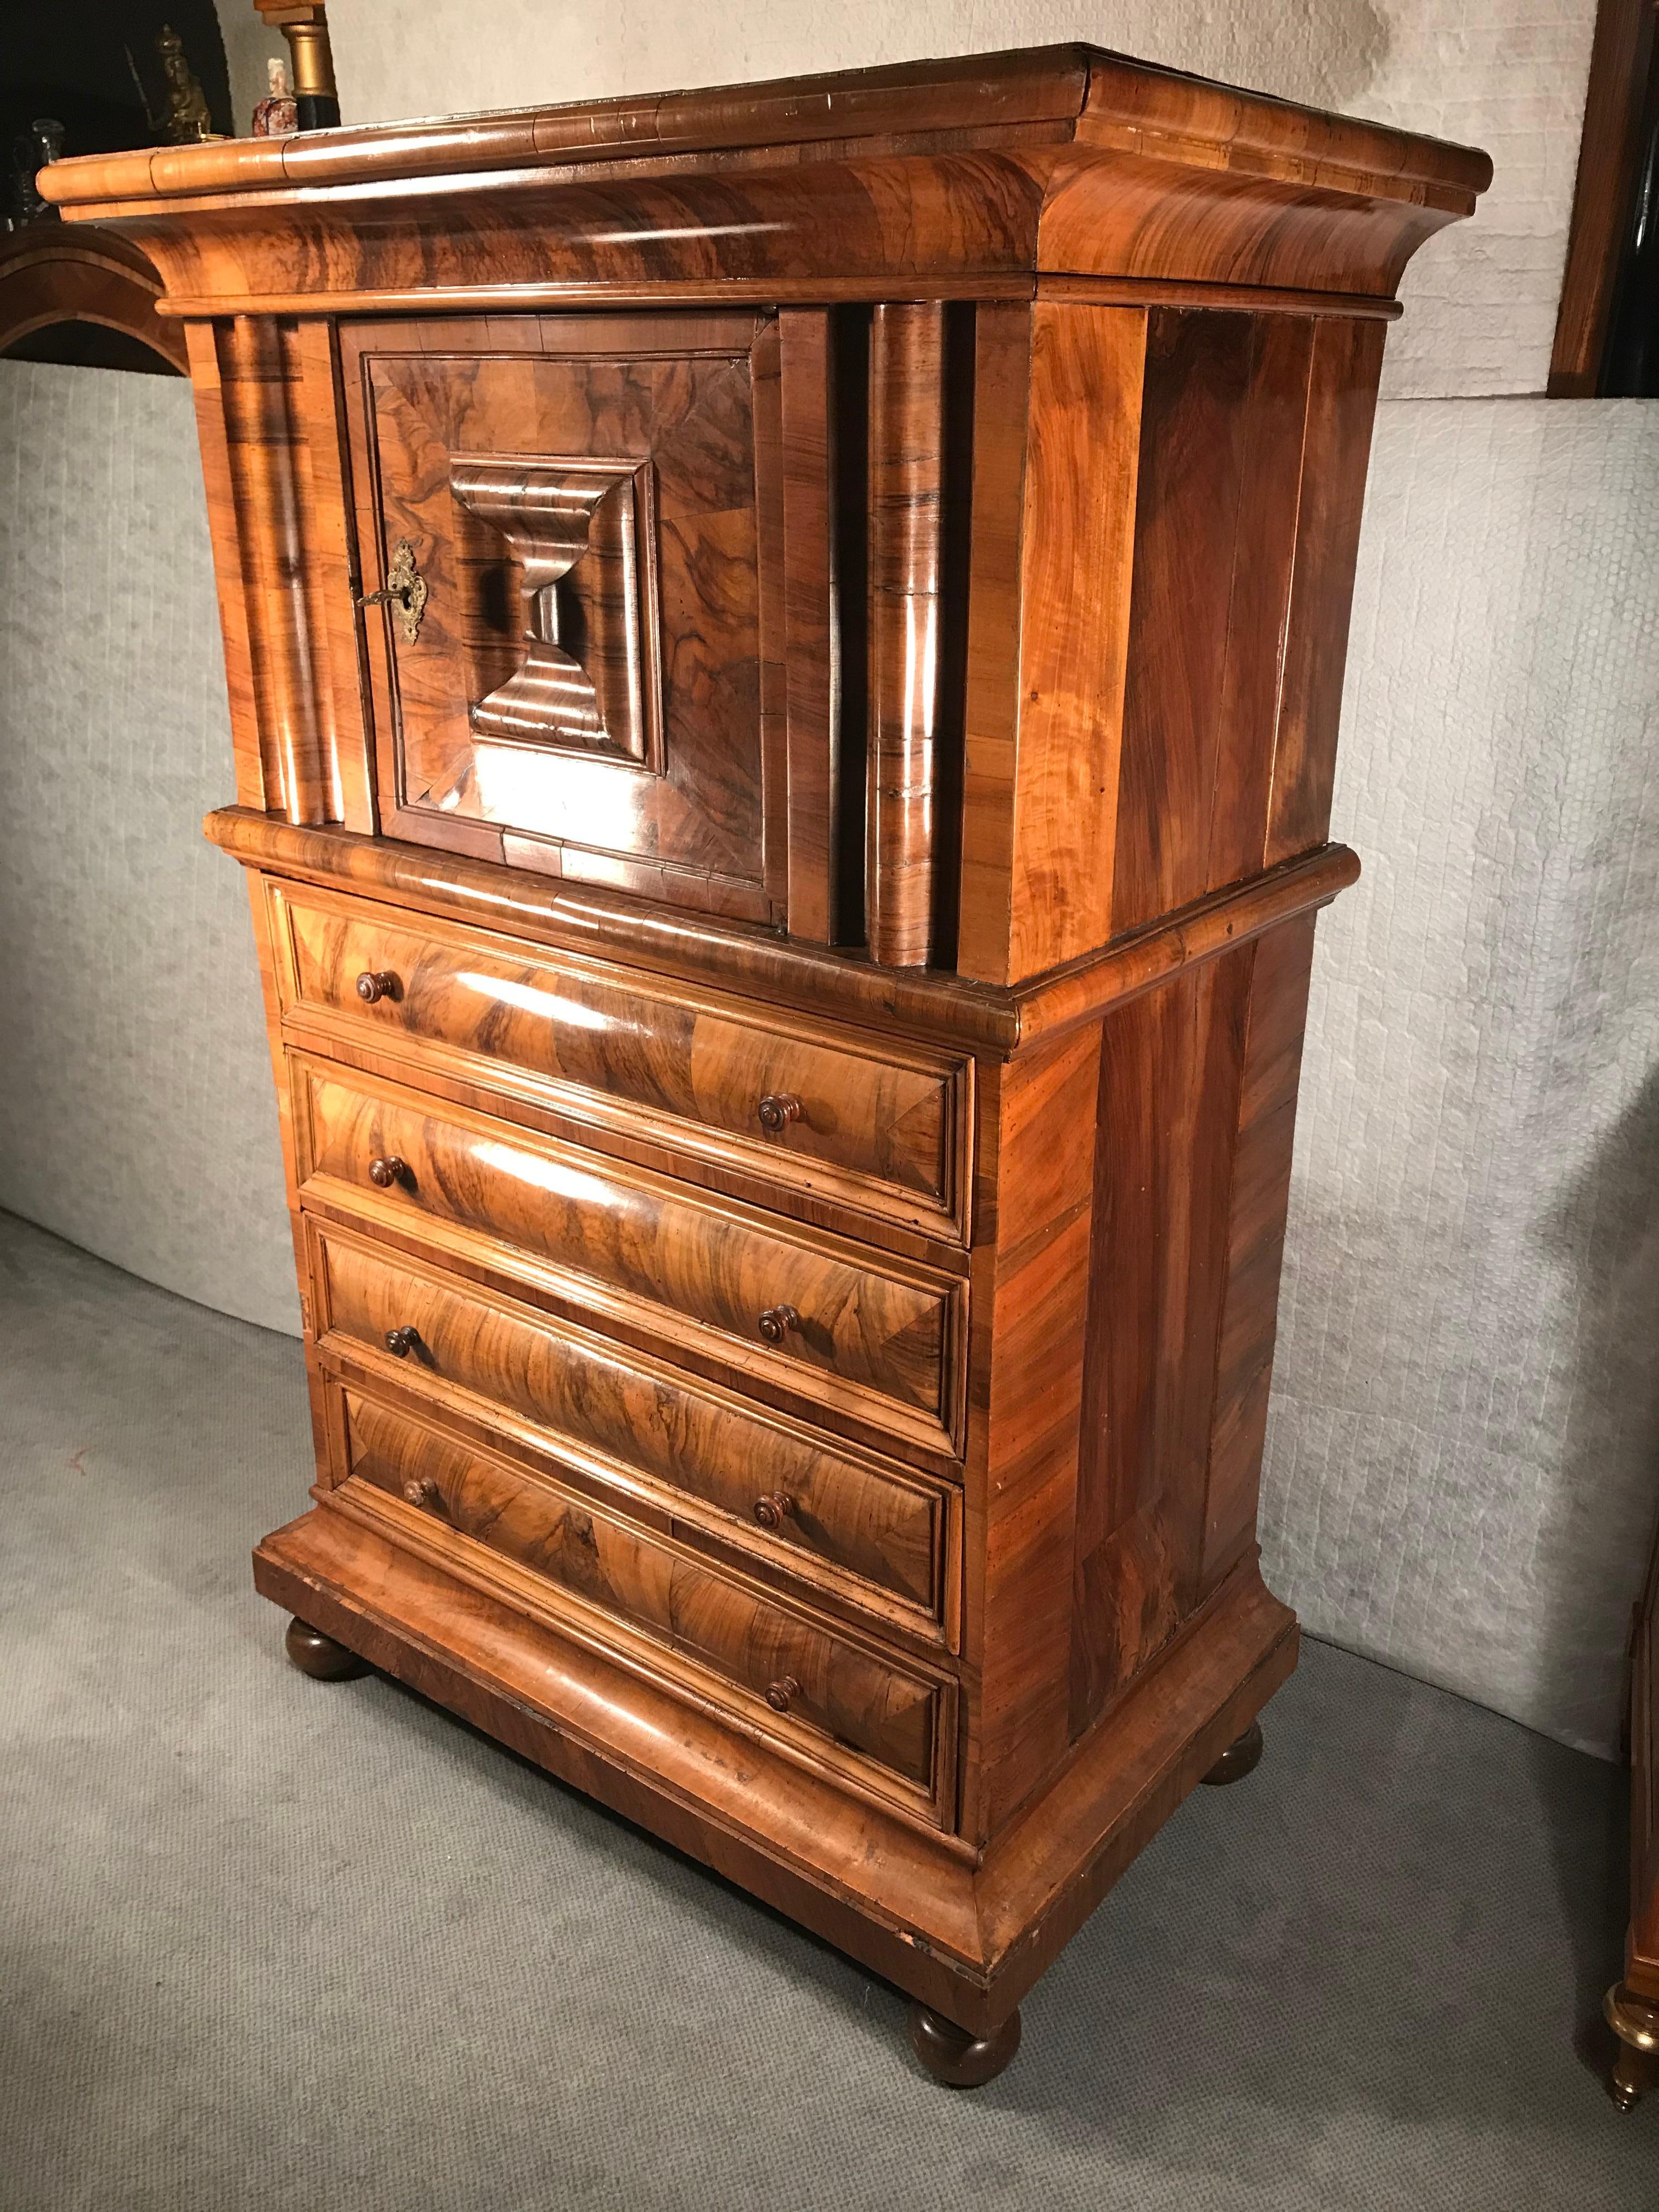 Swiss “Windellade” Cabinet, 1770-1780 In Good Condition For Sale In Belmont, MA